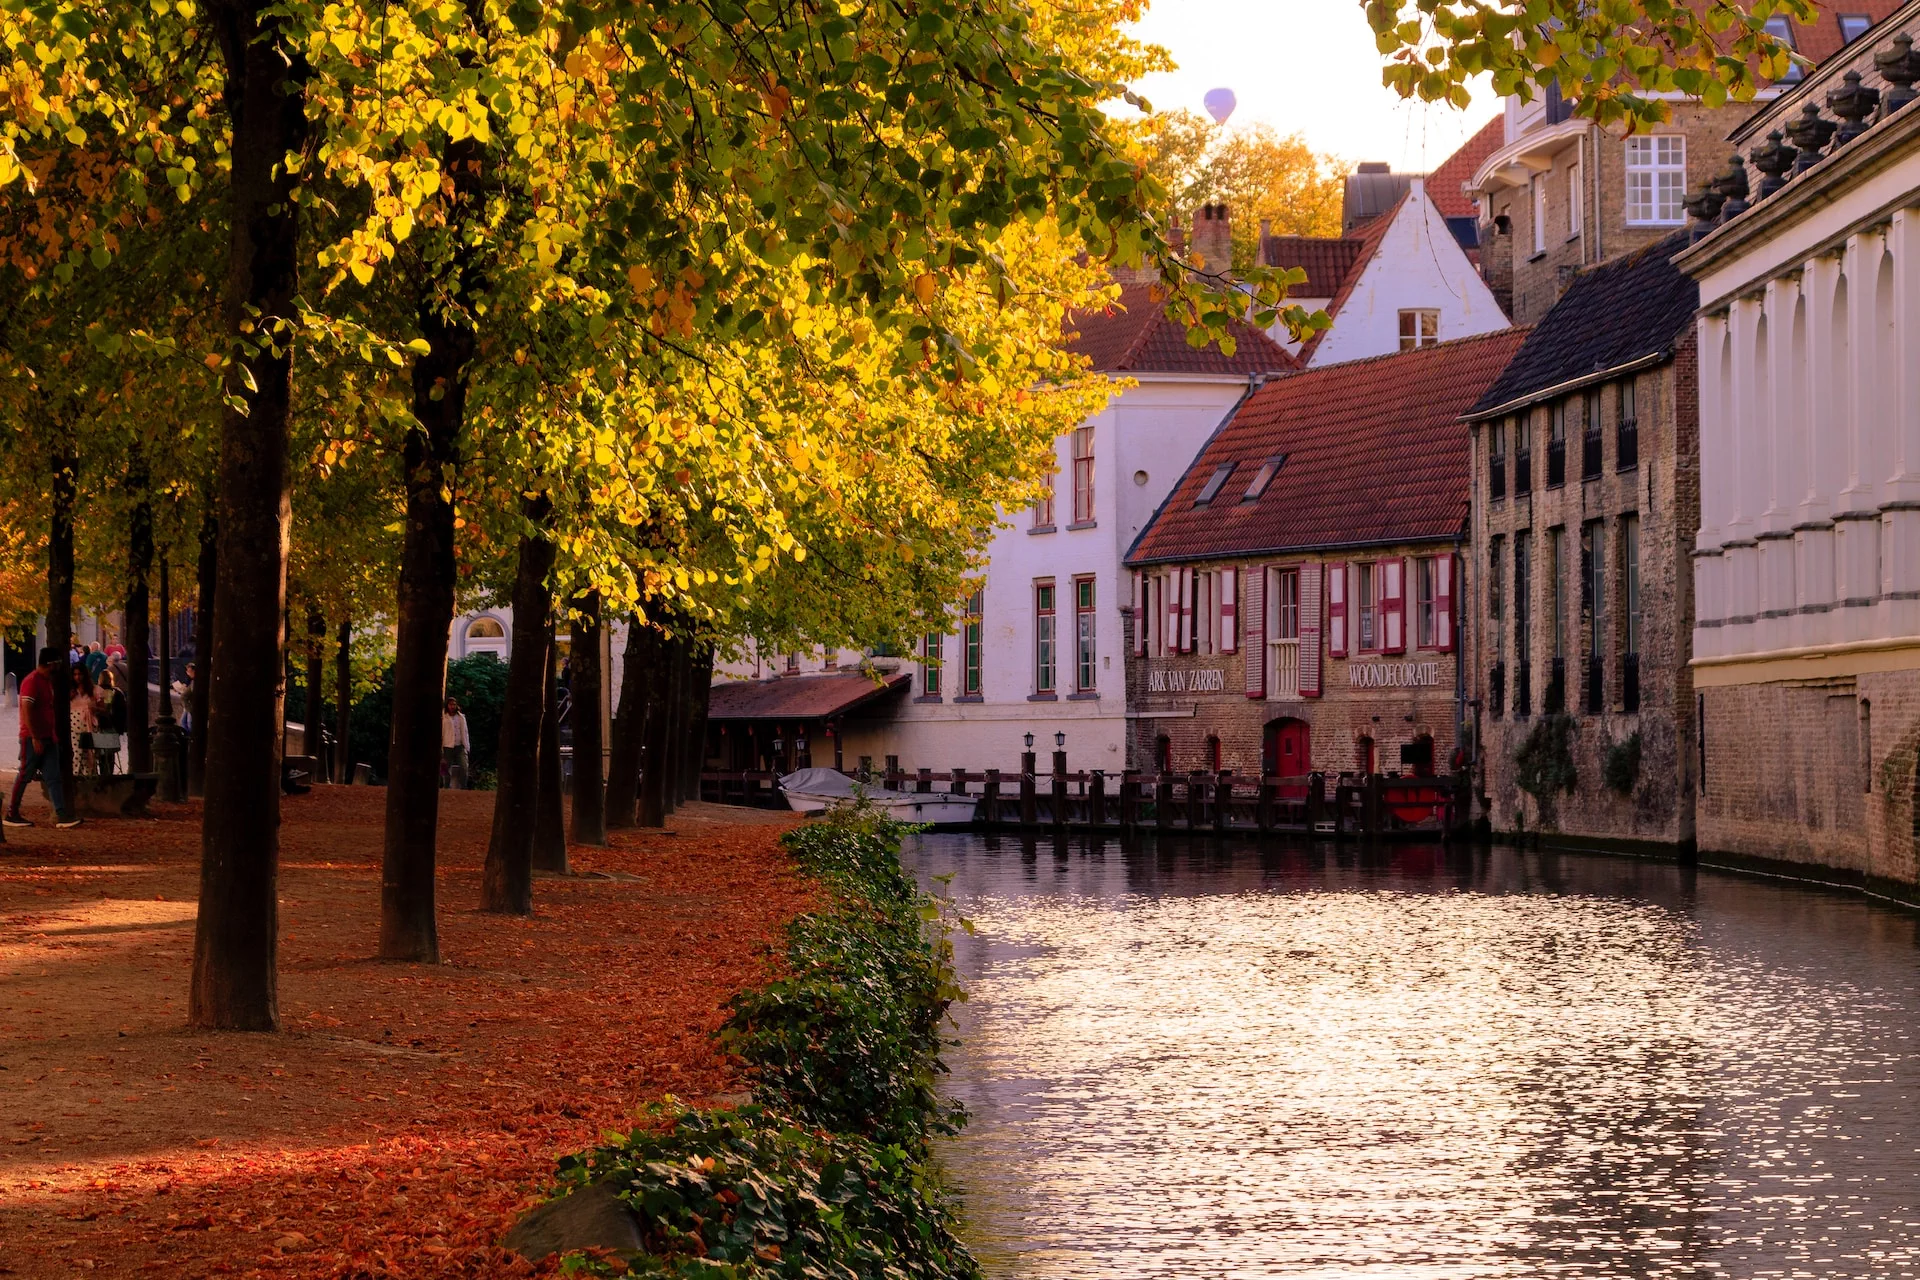 Peaceful, picturesque Bruges is filled with photo ops.